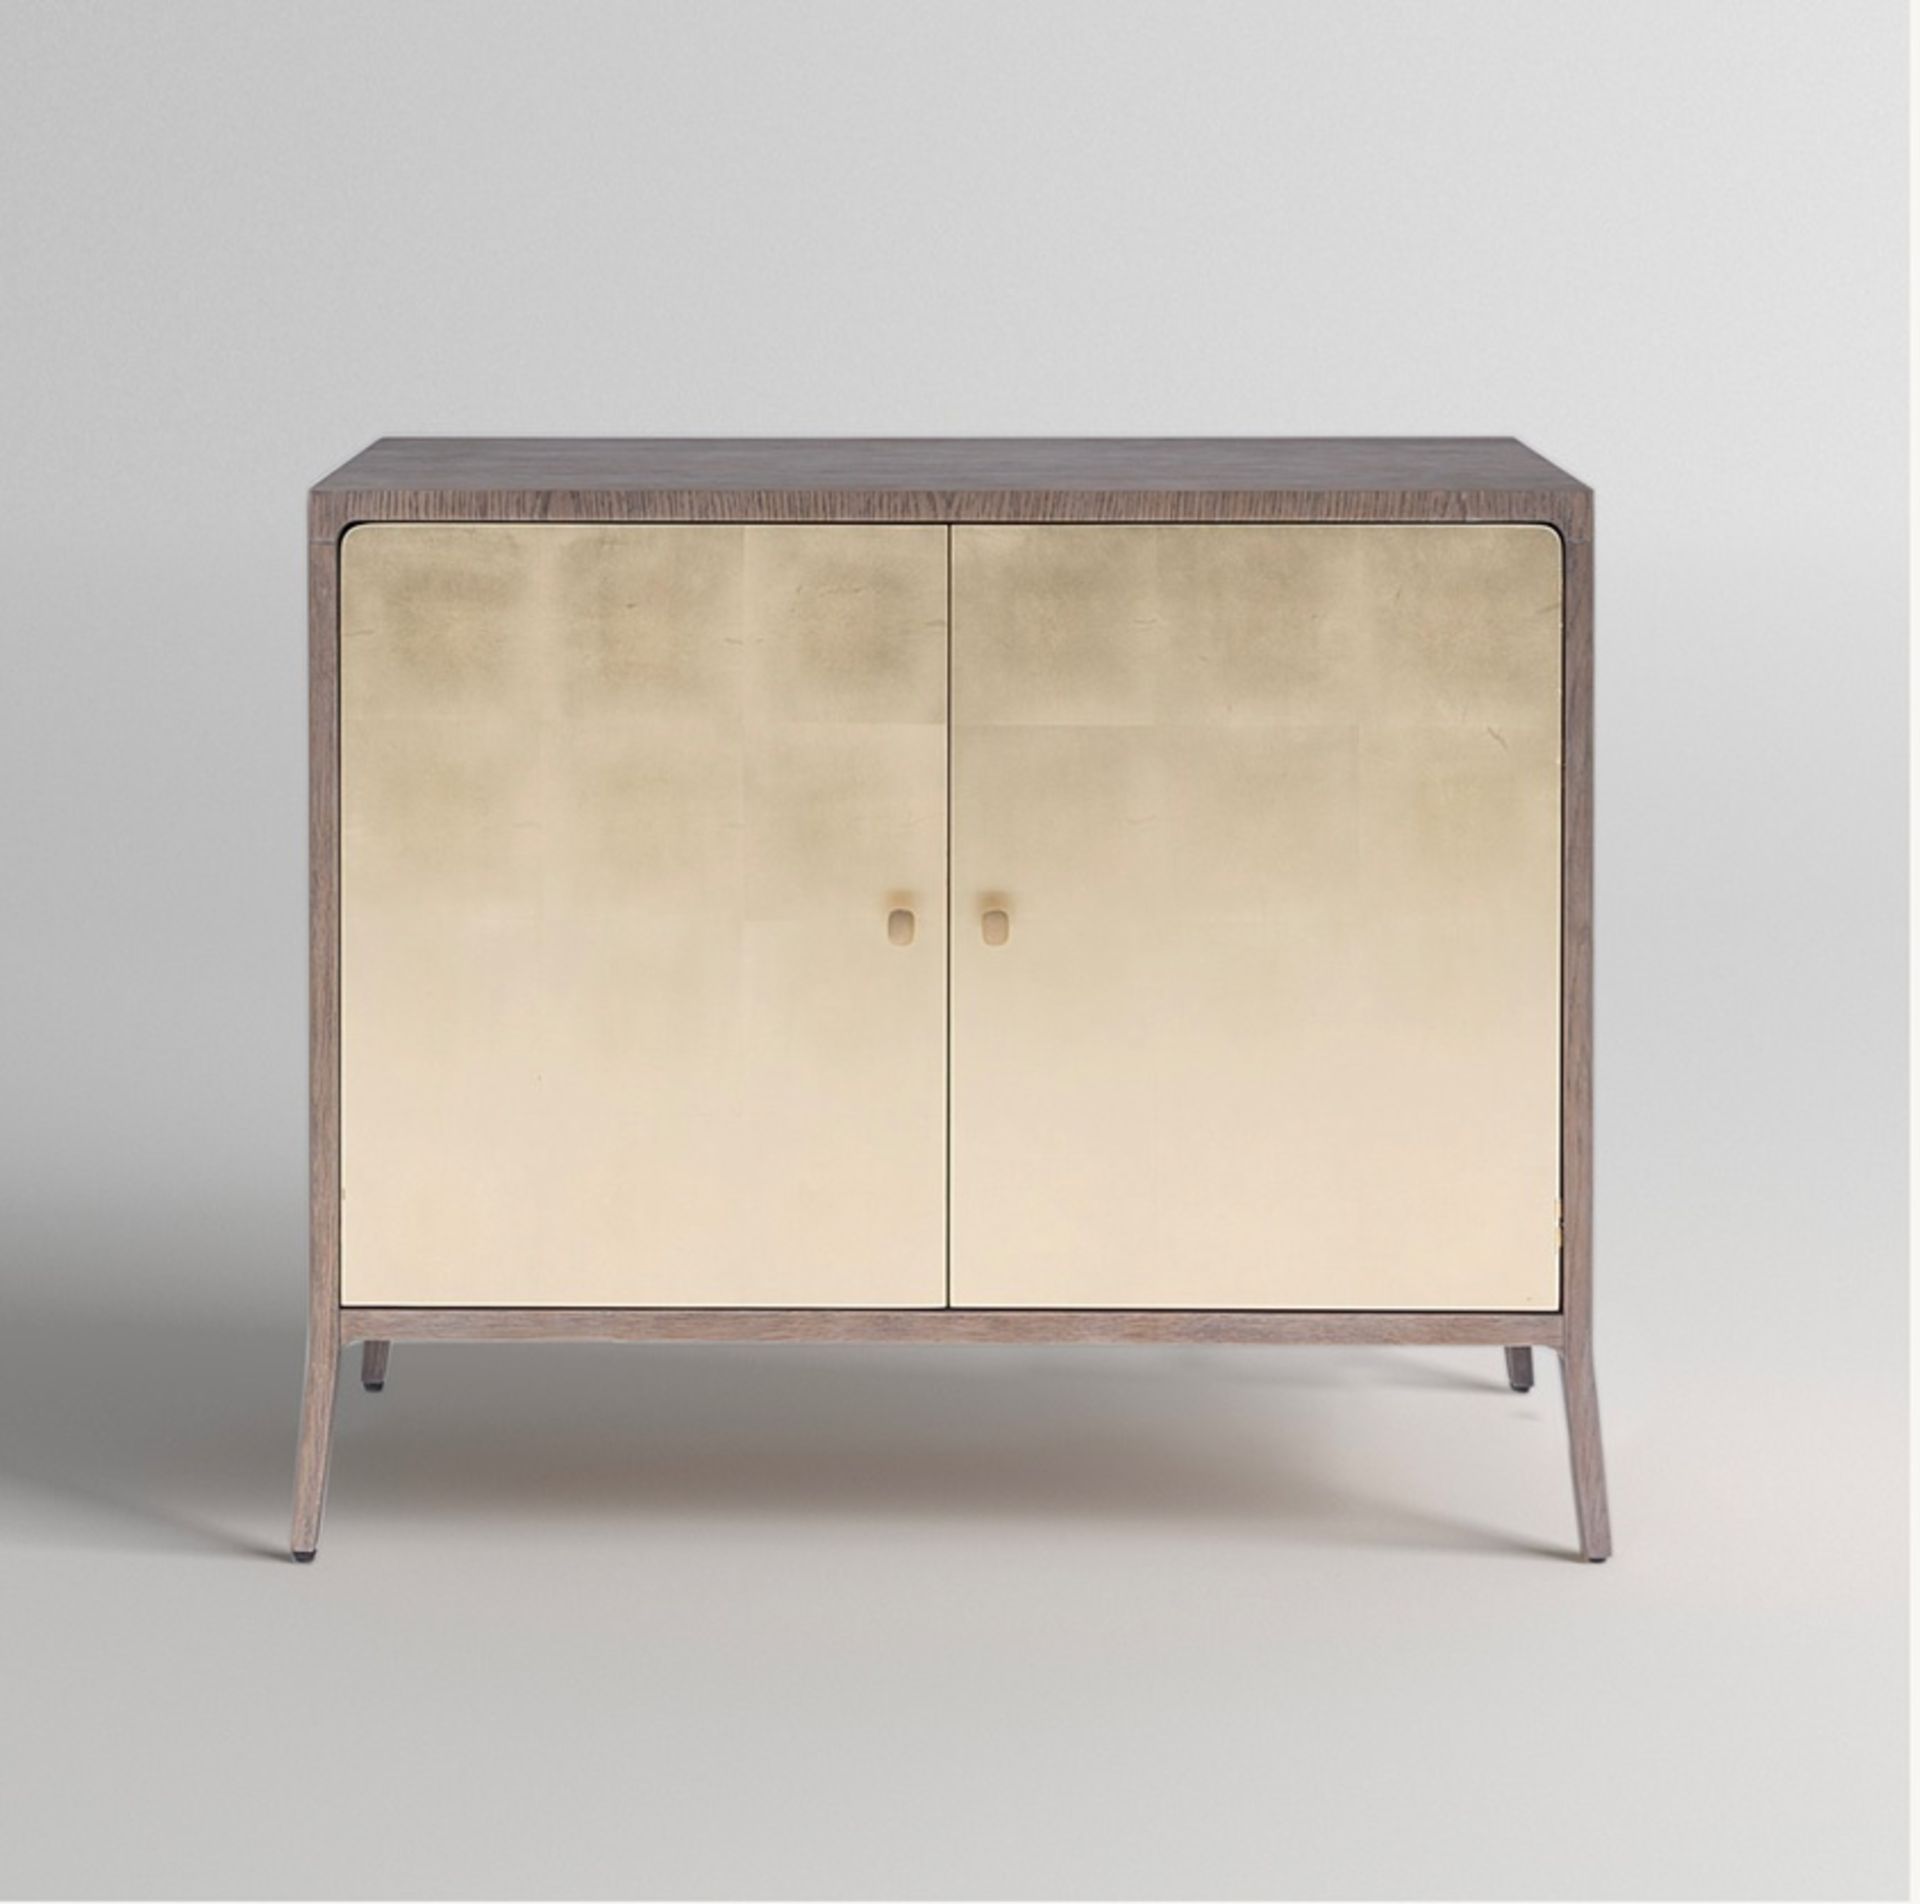 Hanson Sideboard There are striking lines in the contemporary structure, and the doors inside and